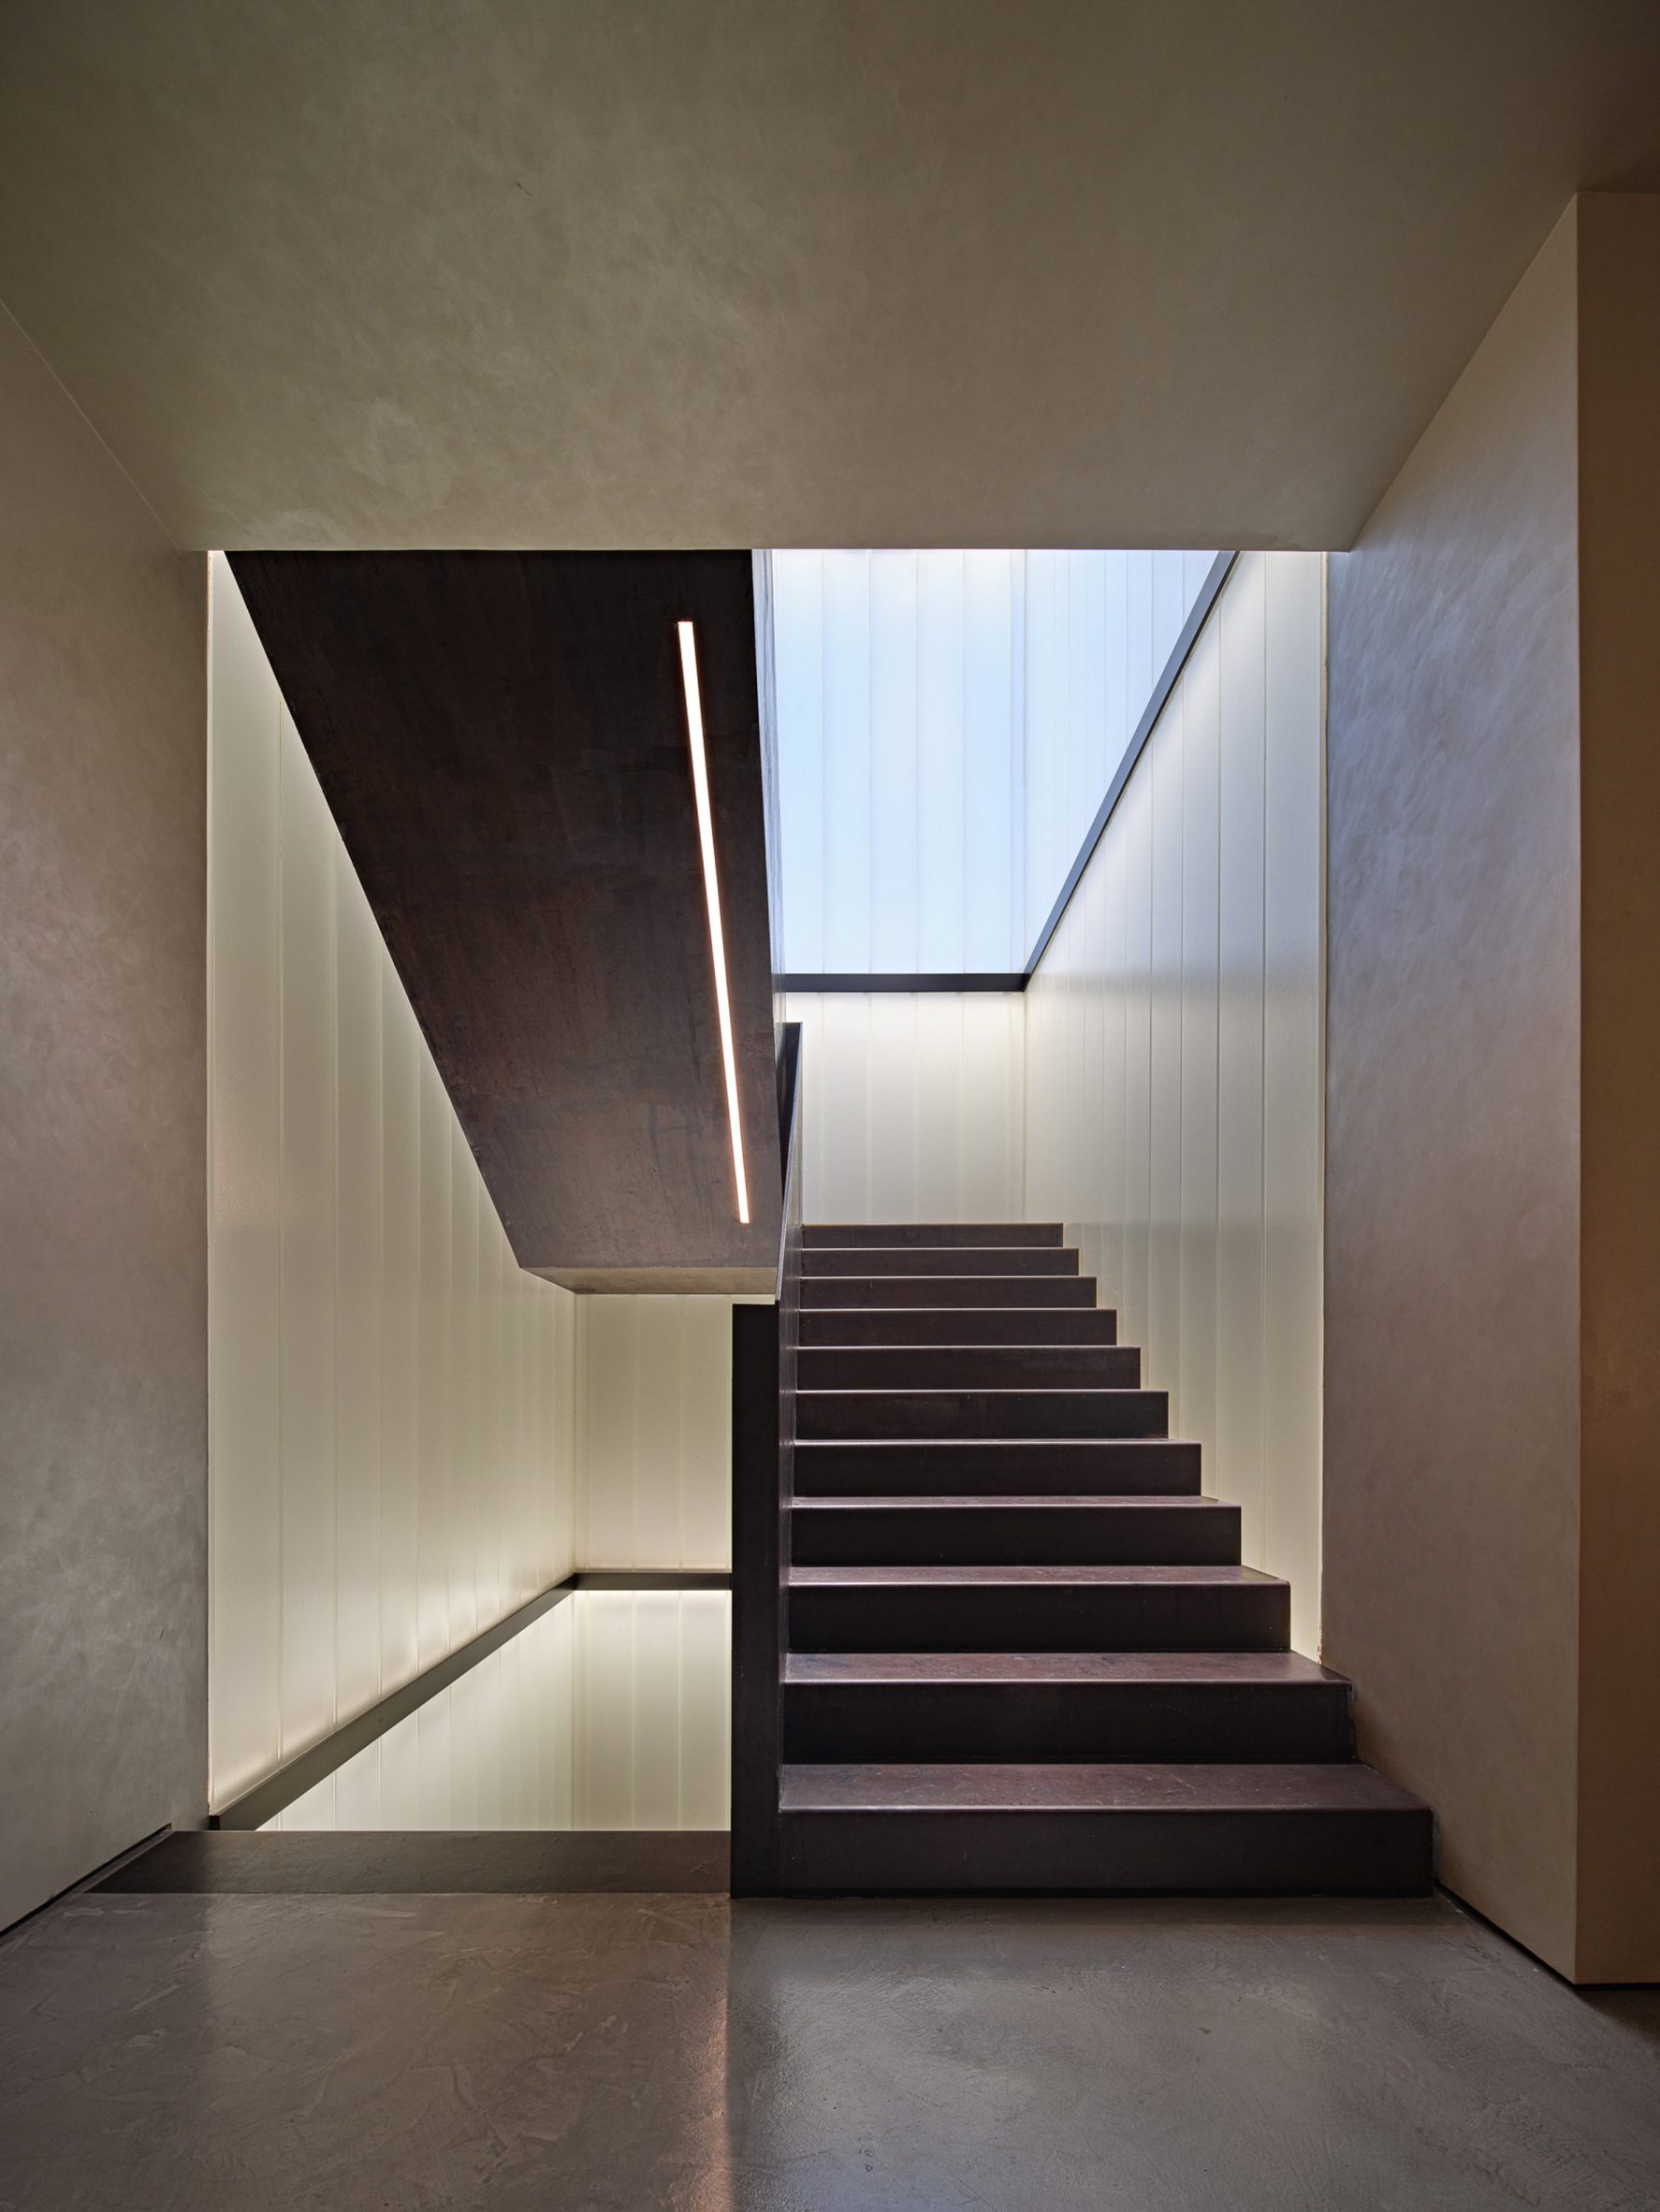 Staircase designed by Studio8